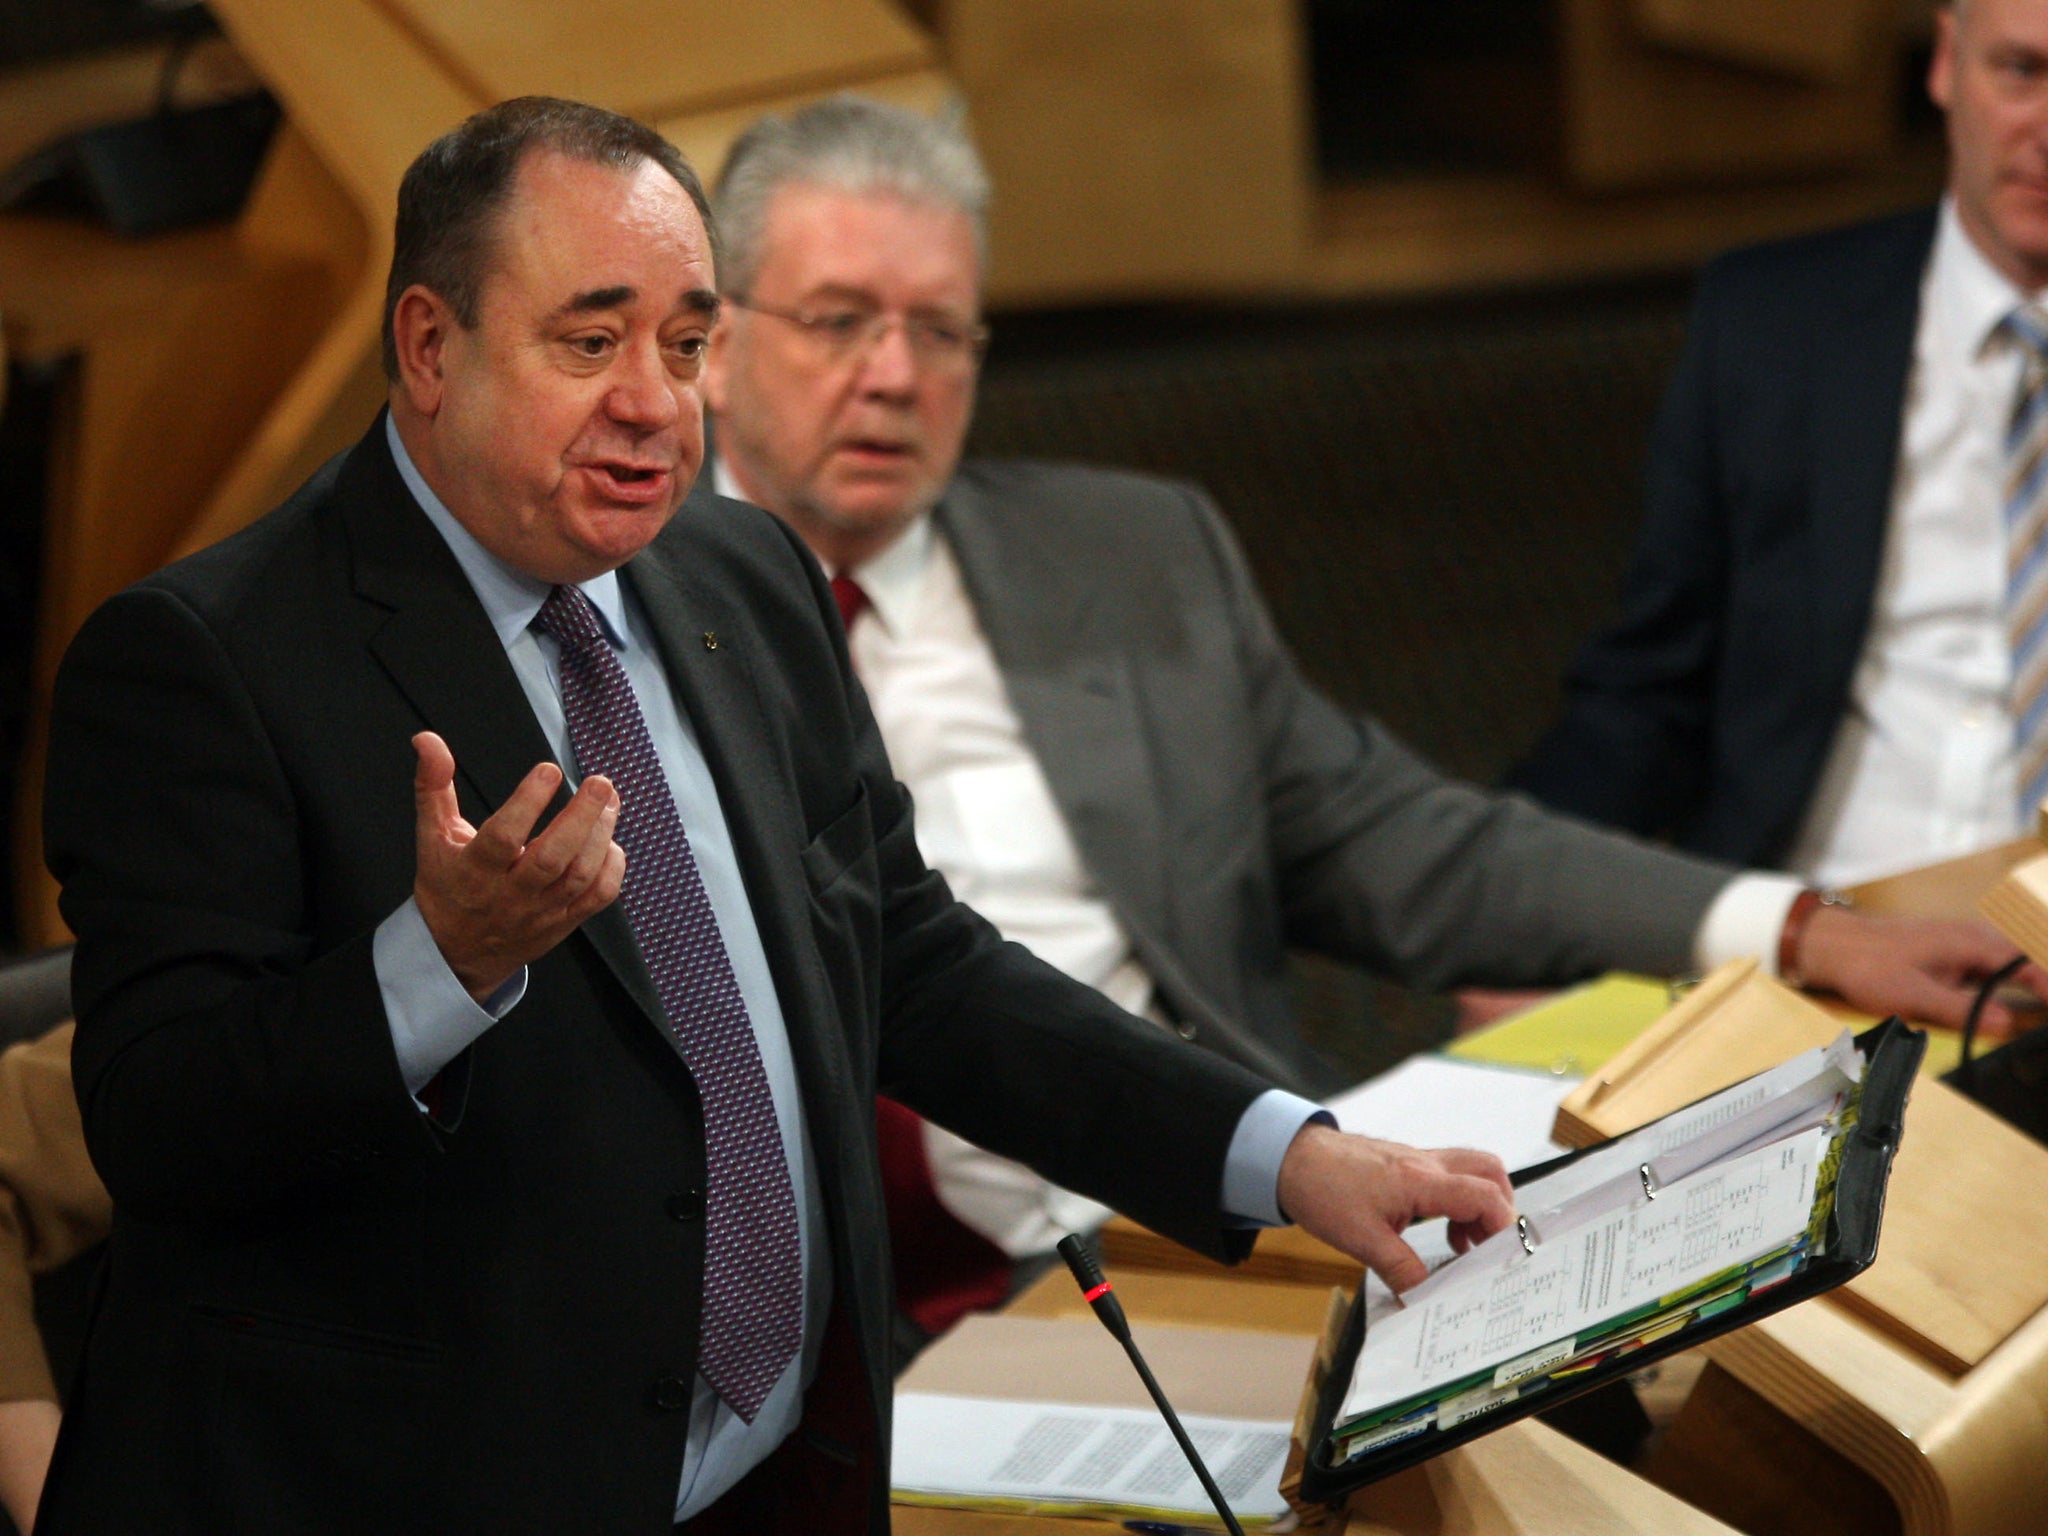 The Scottish First Minister Alex Salmond has been moderate